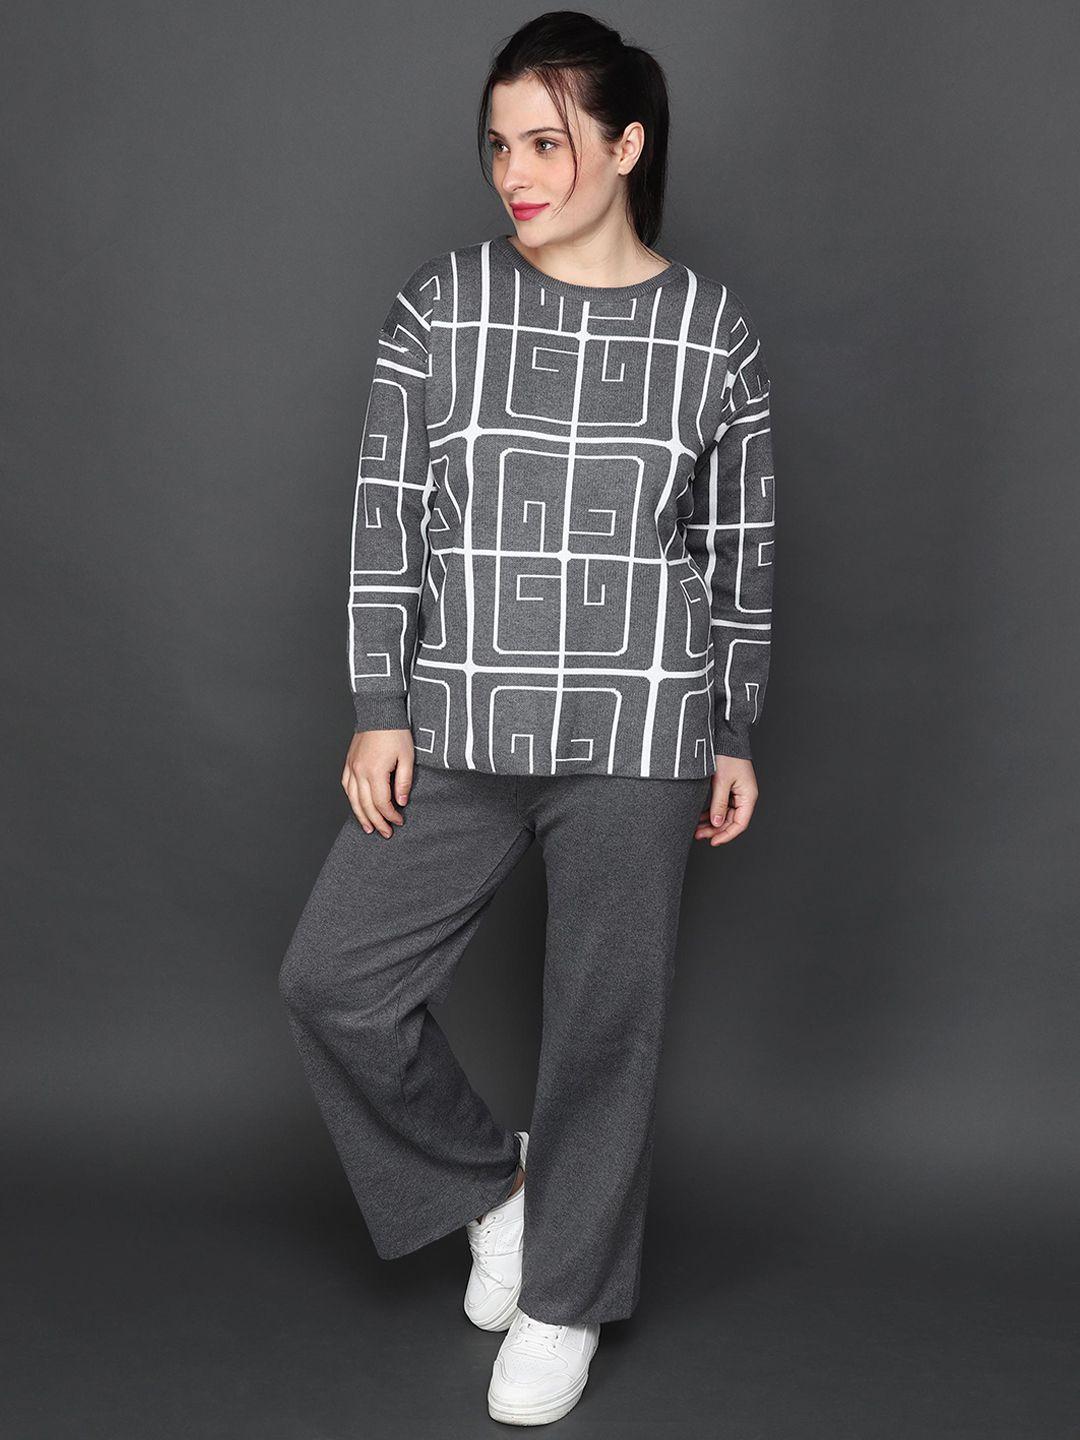 albion printed pure cotton mock neck sweater & trousers co-ords